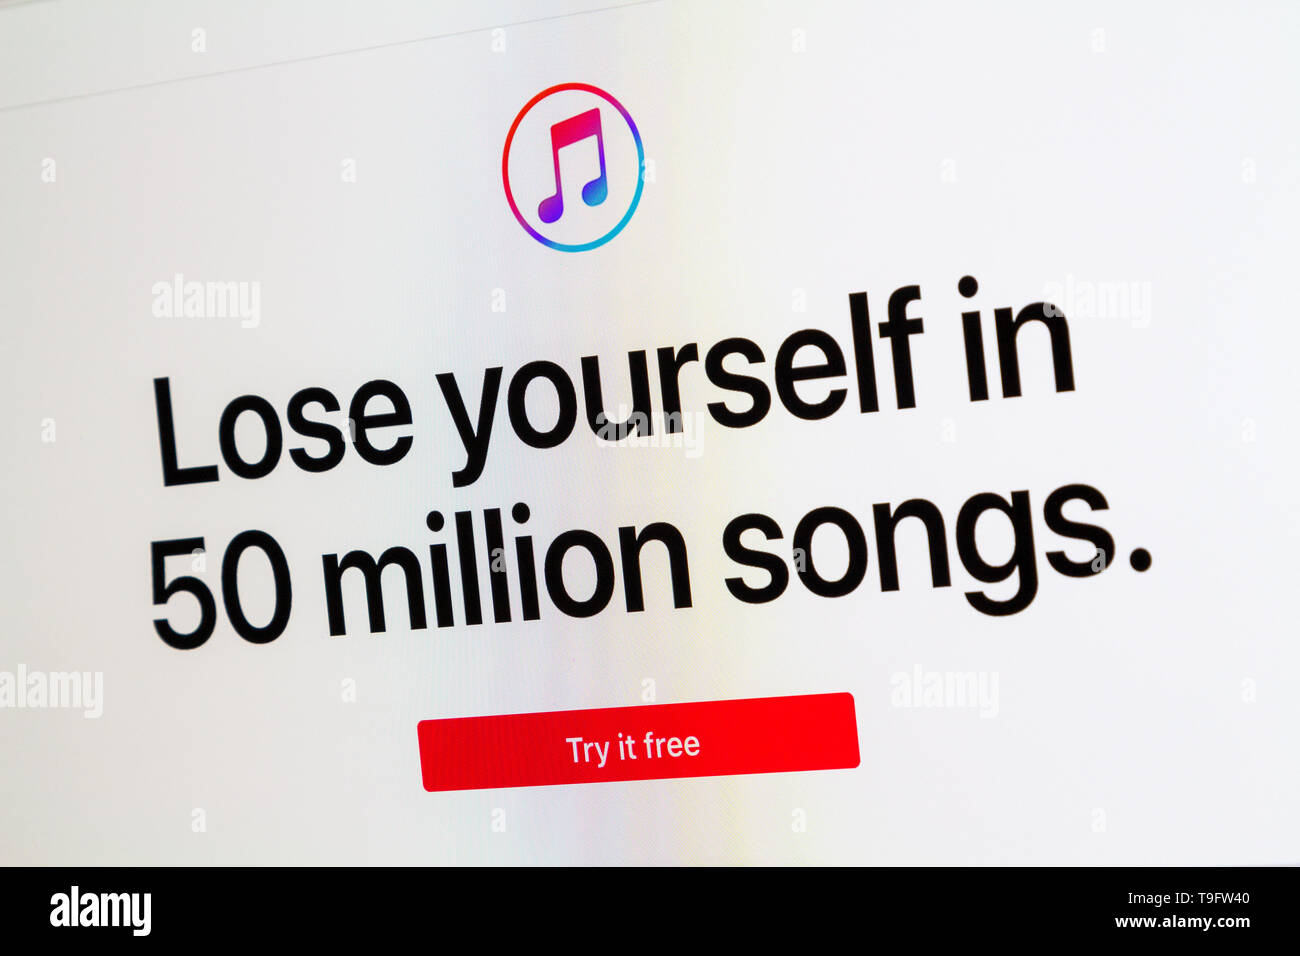 Apple Music website Lose yourself in 50 million songs Stock Photo